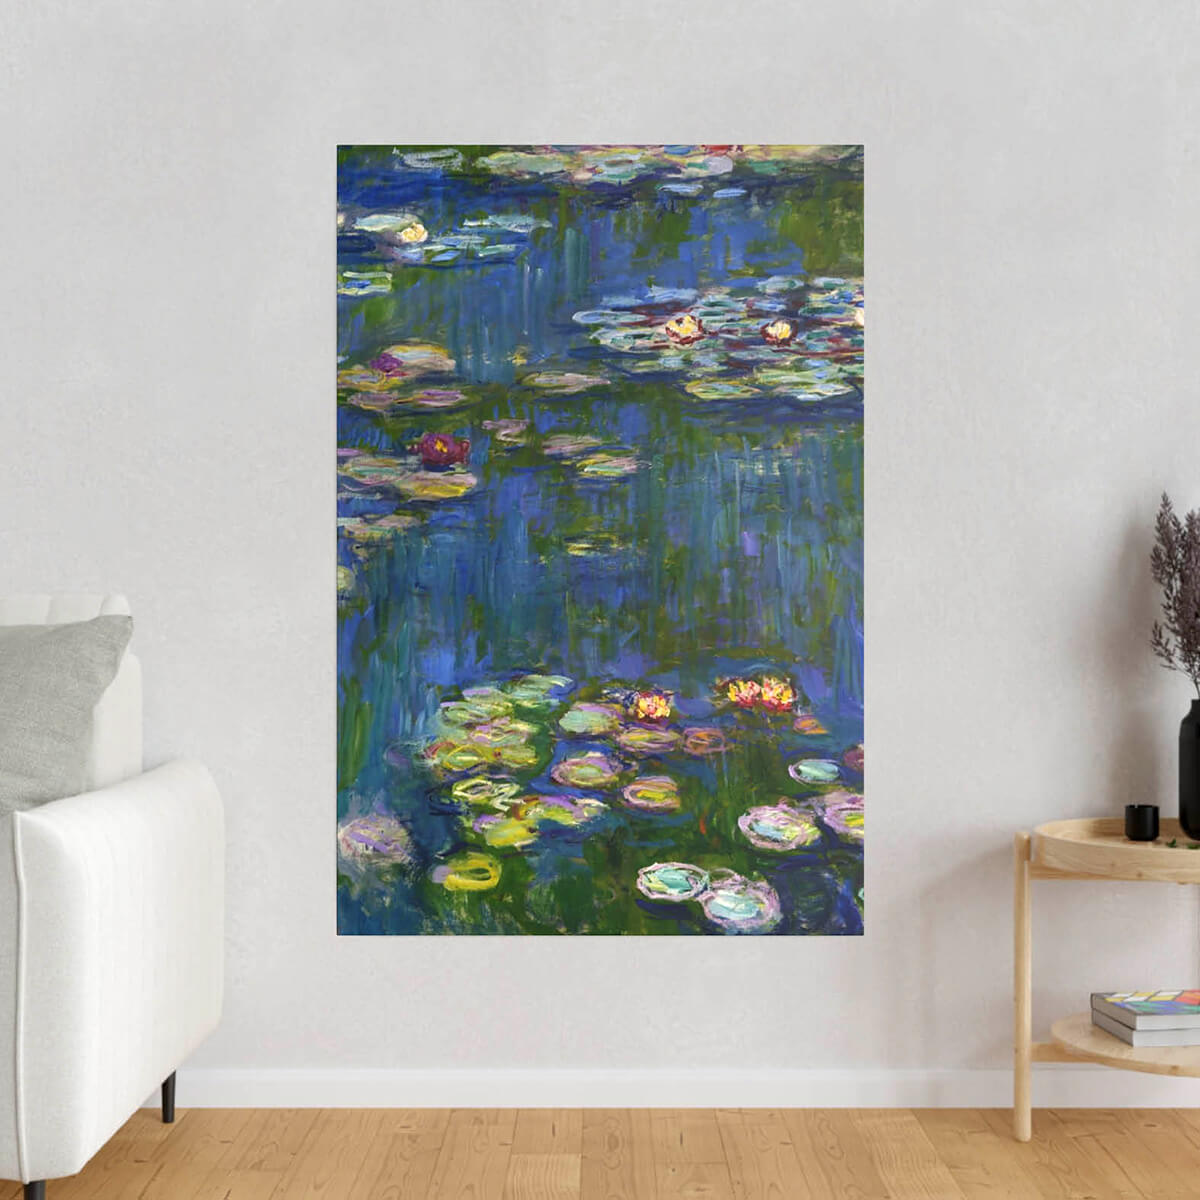 Ethereal art inspired by Claude Monet